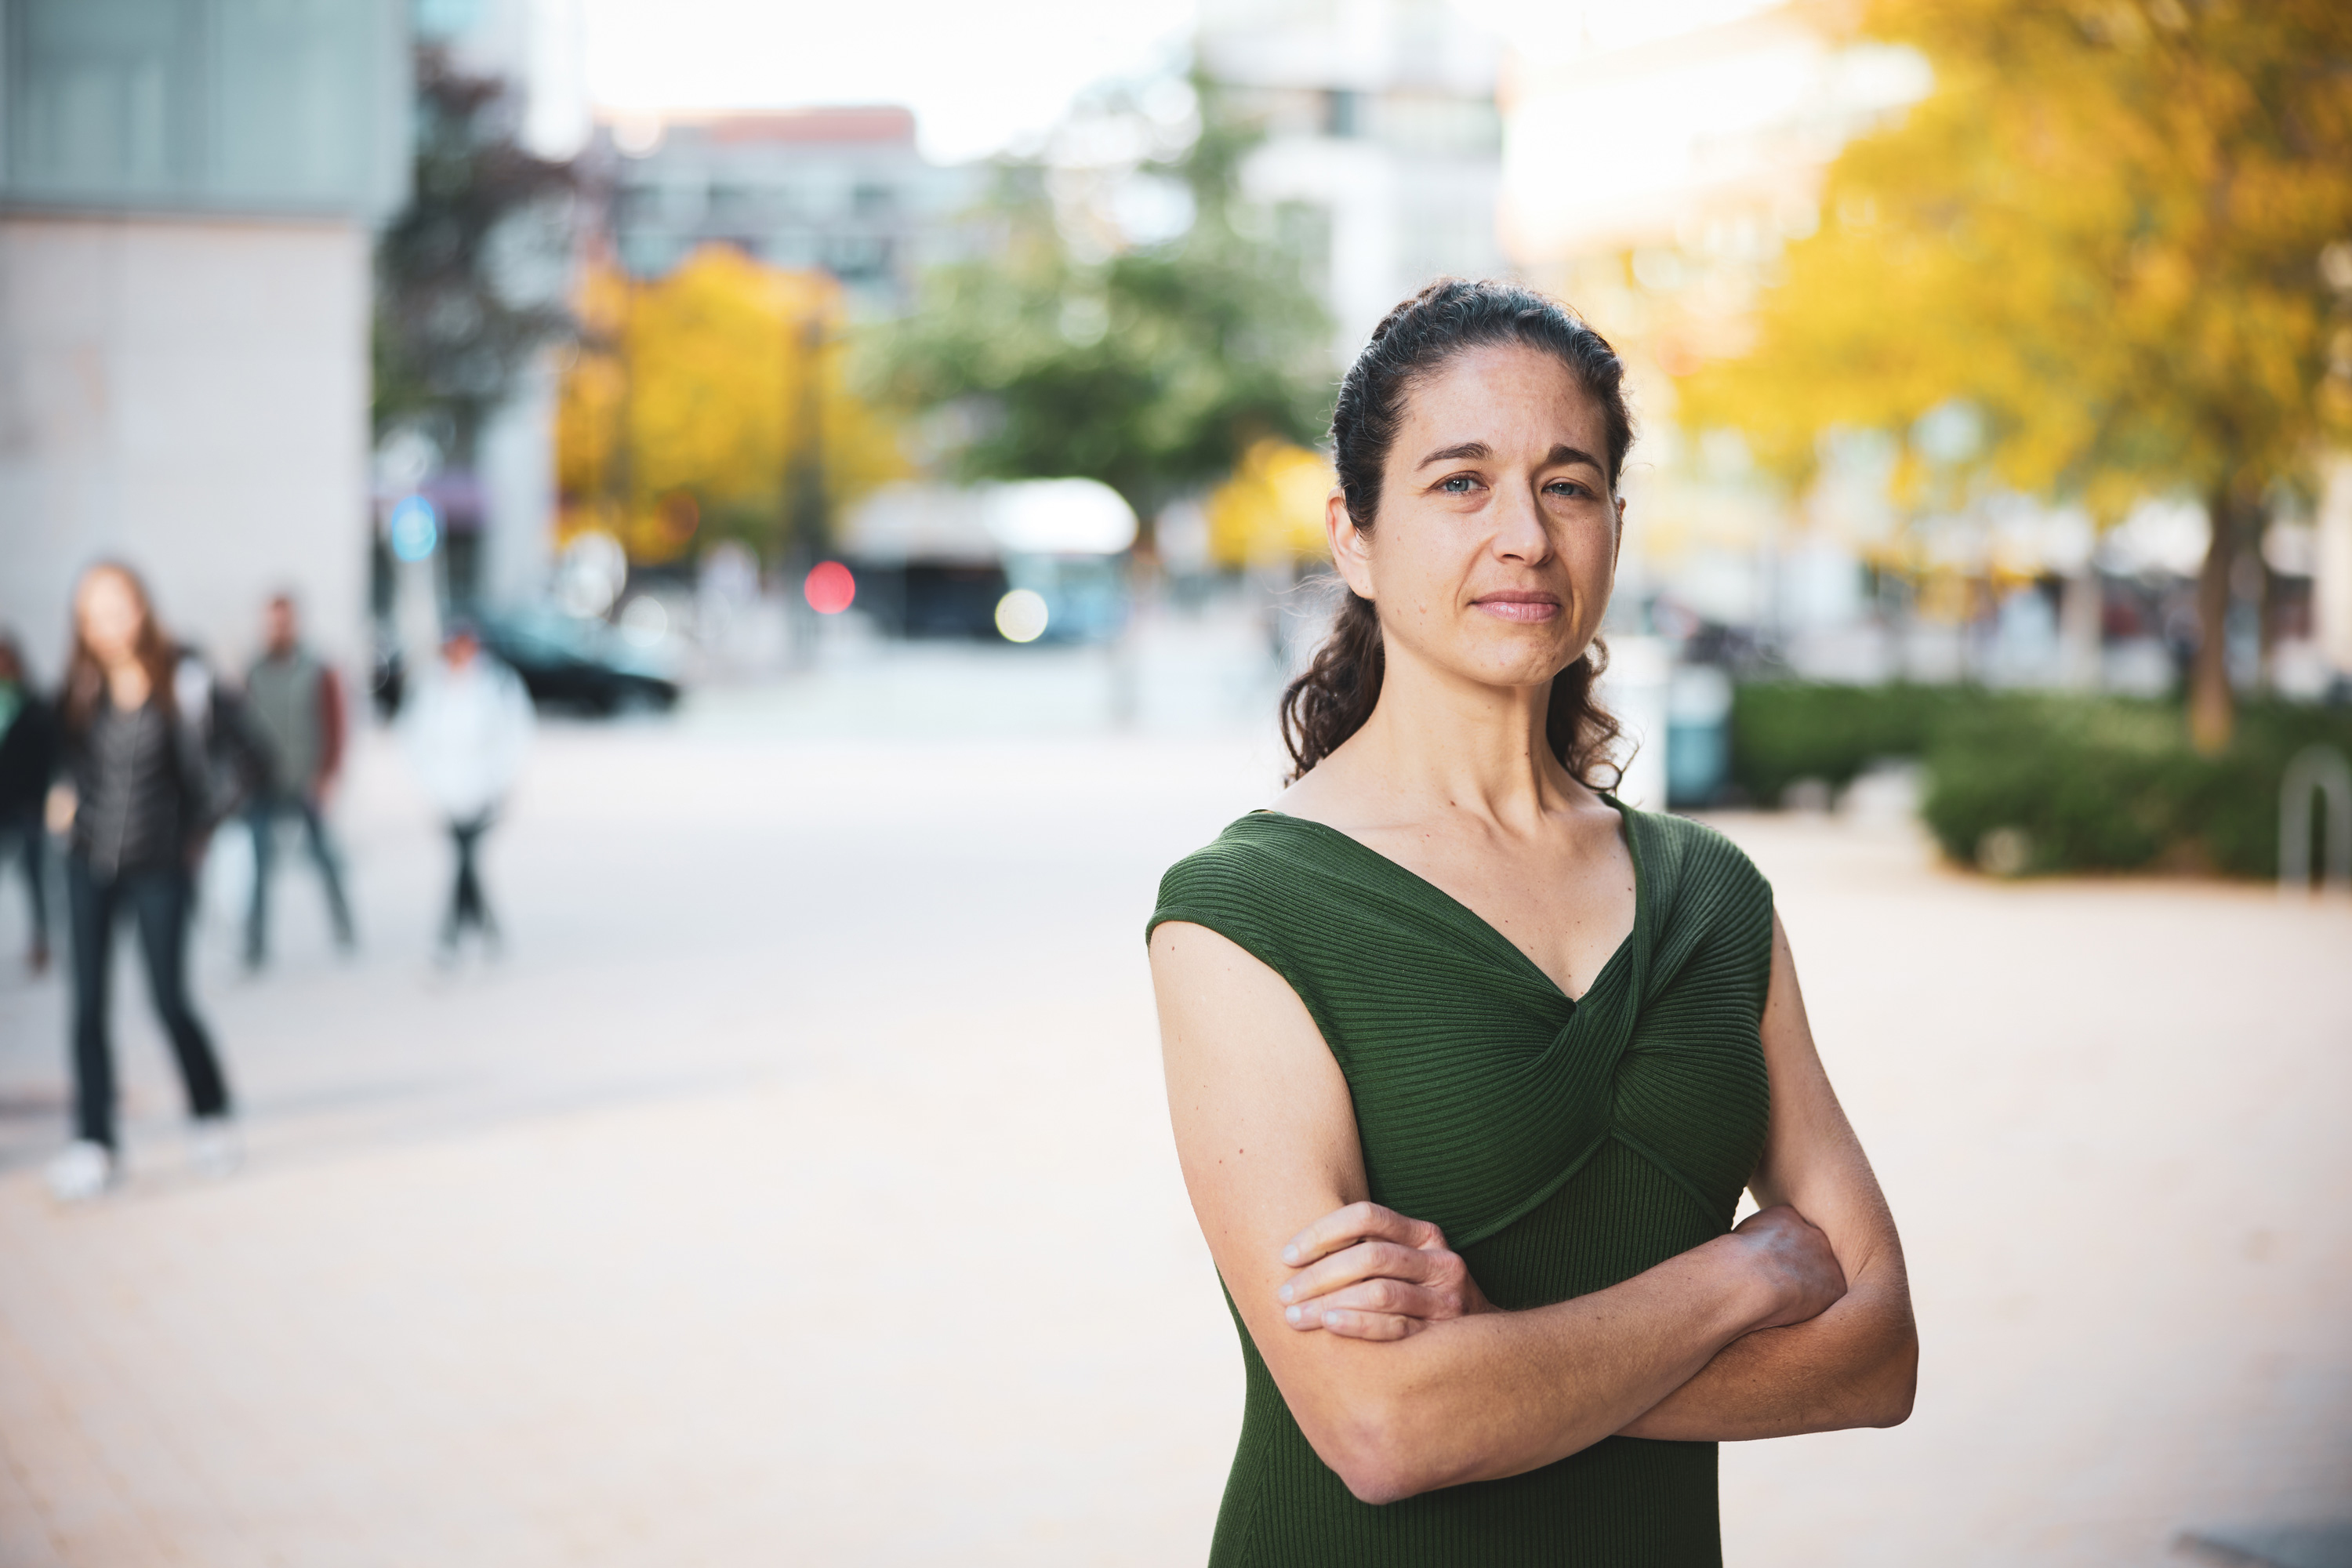 Through teaching, research, and coalition building, professor of materials science and engineering Elsa Olivetti’s lifelong passion for sustainability bolters MIT’s efforts to combat climate change.